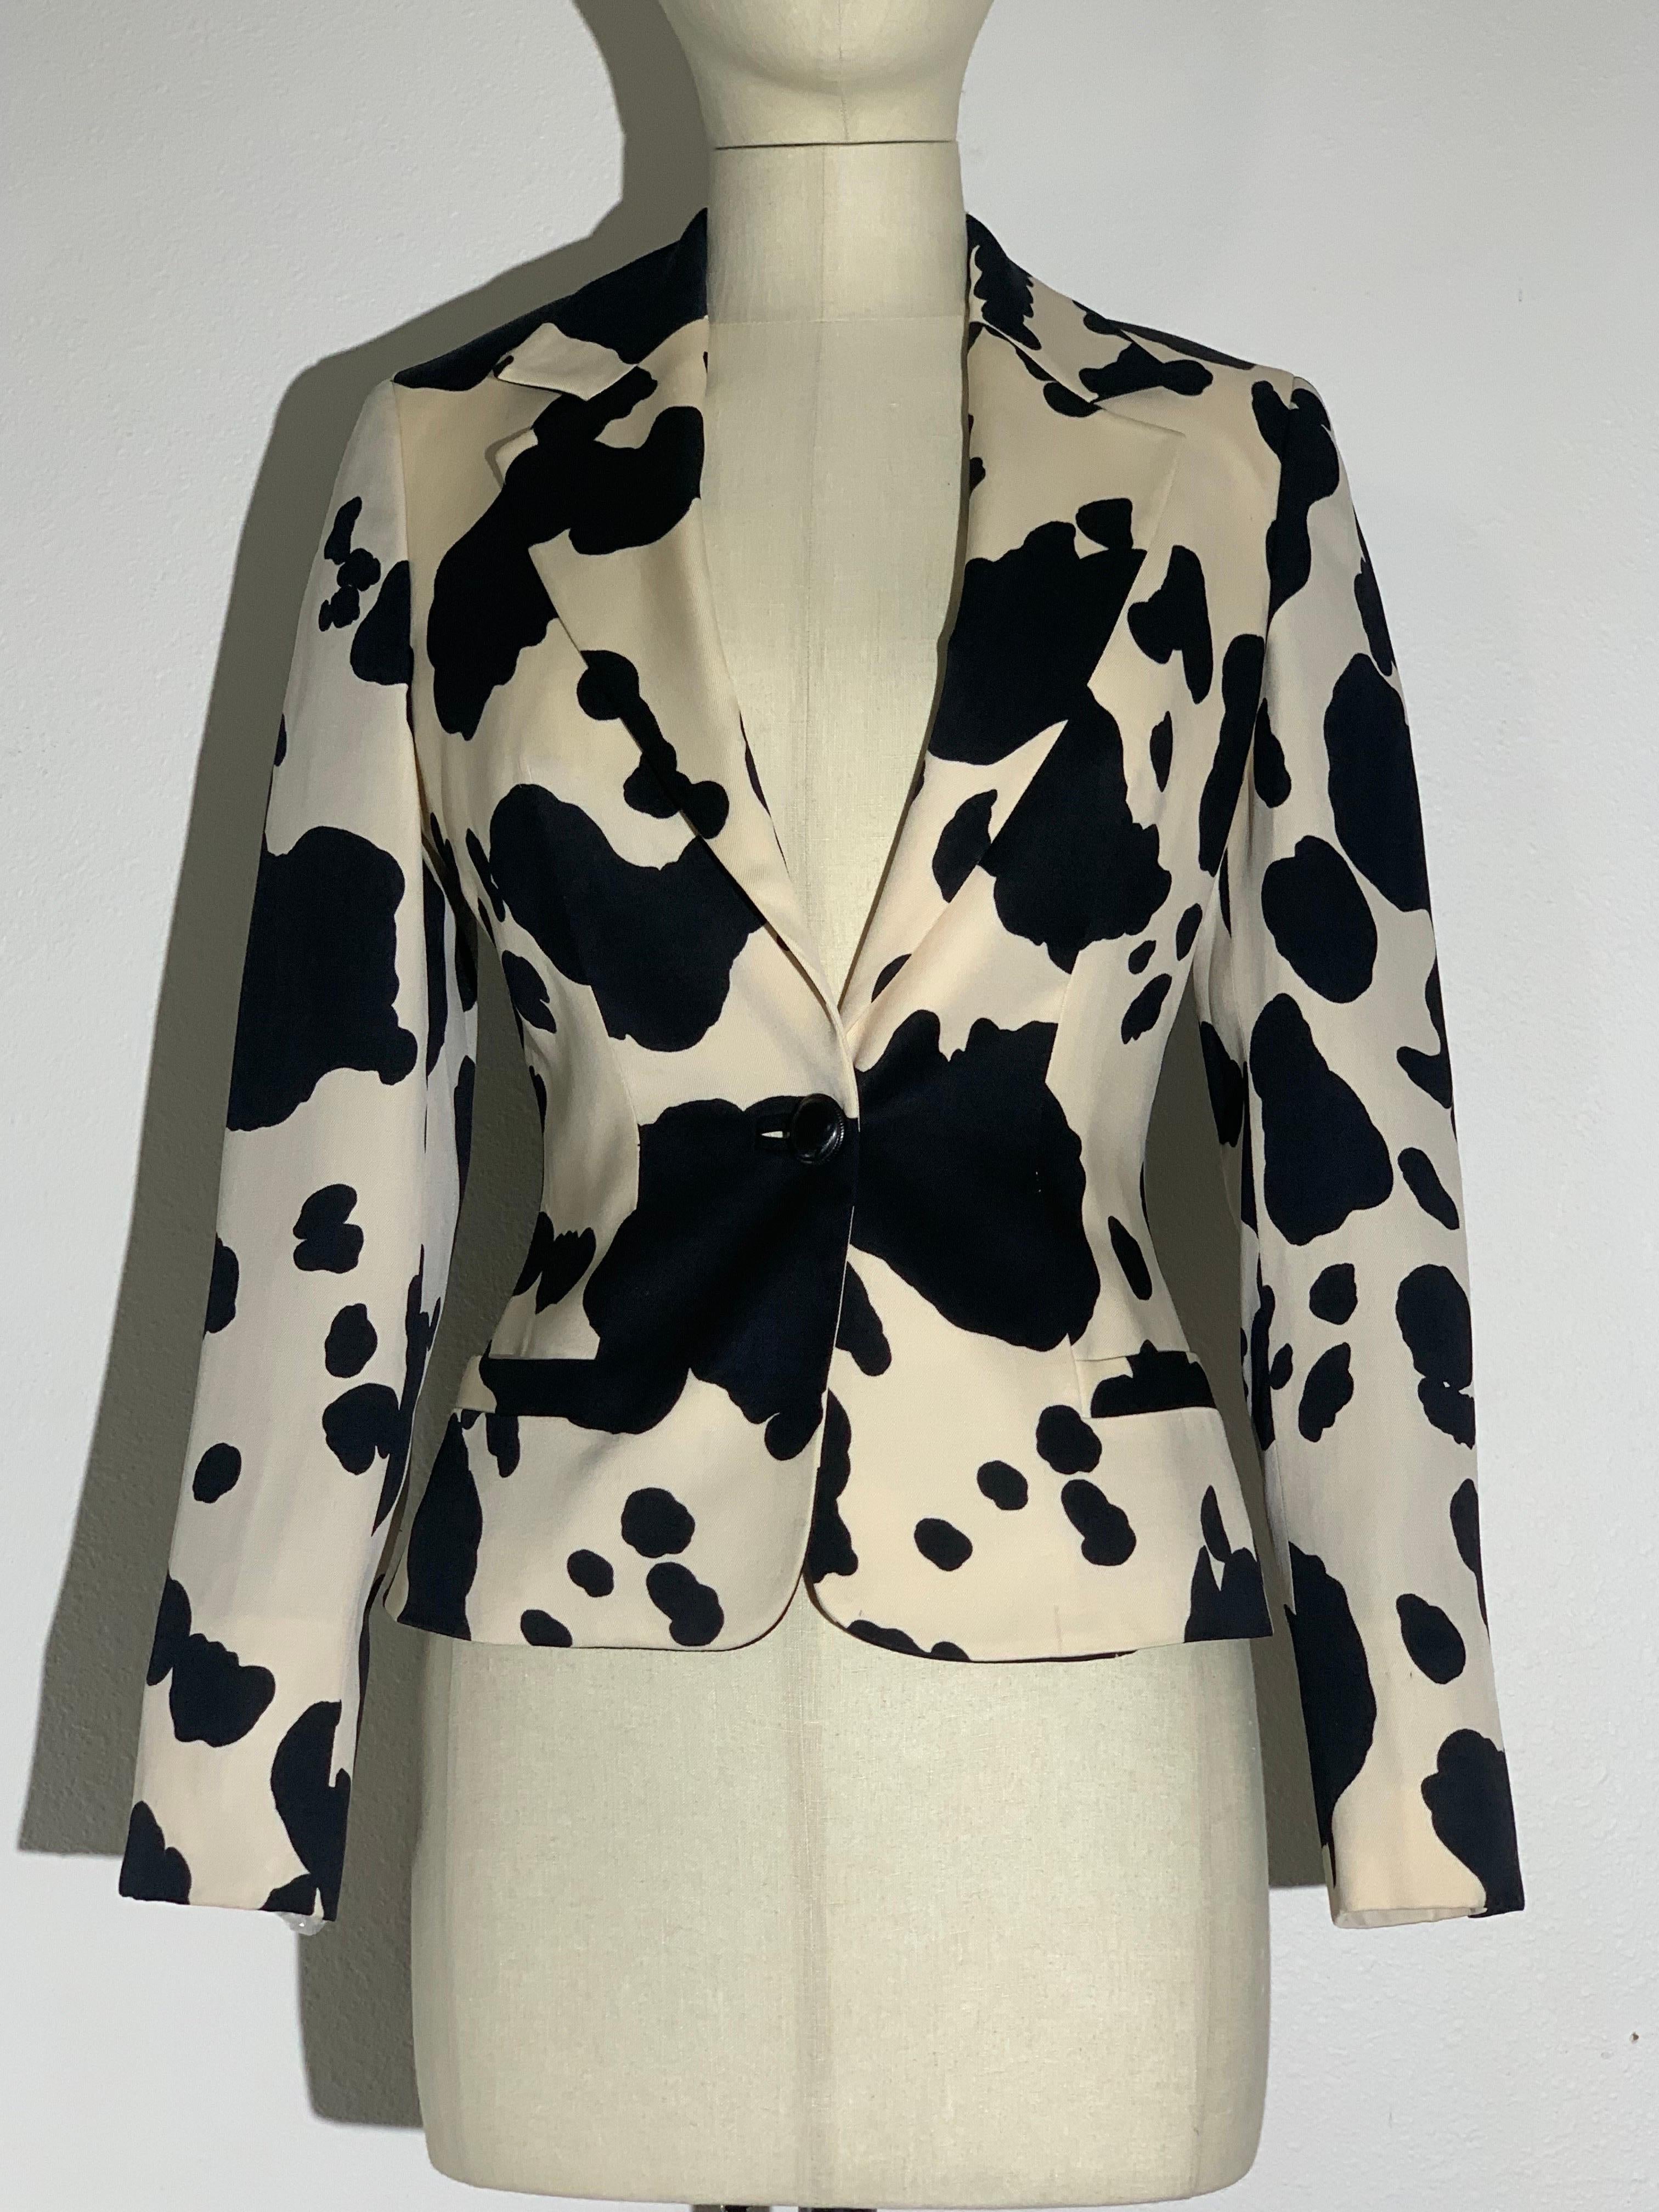 Gianni Versace Black/White Cow Print Wool Gabardine Jacket w Single Button In Excellent Condition For Sale In Gresham, OR